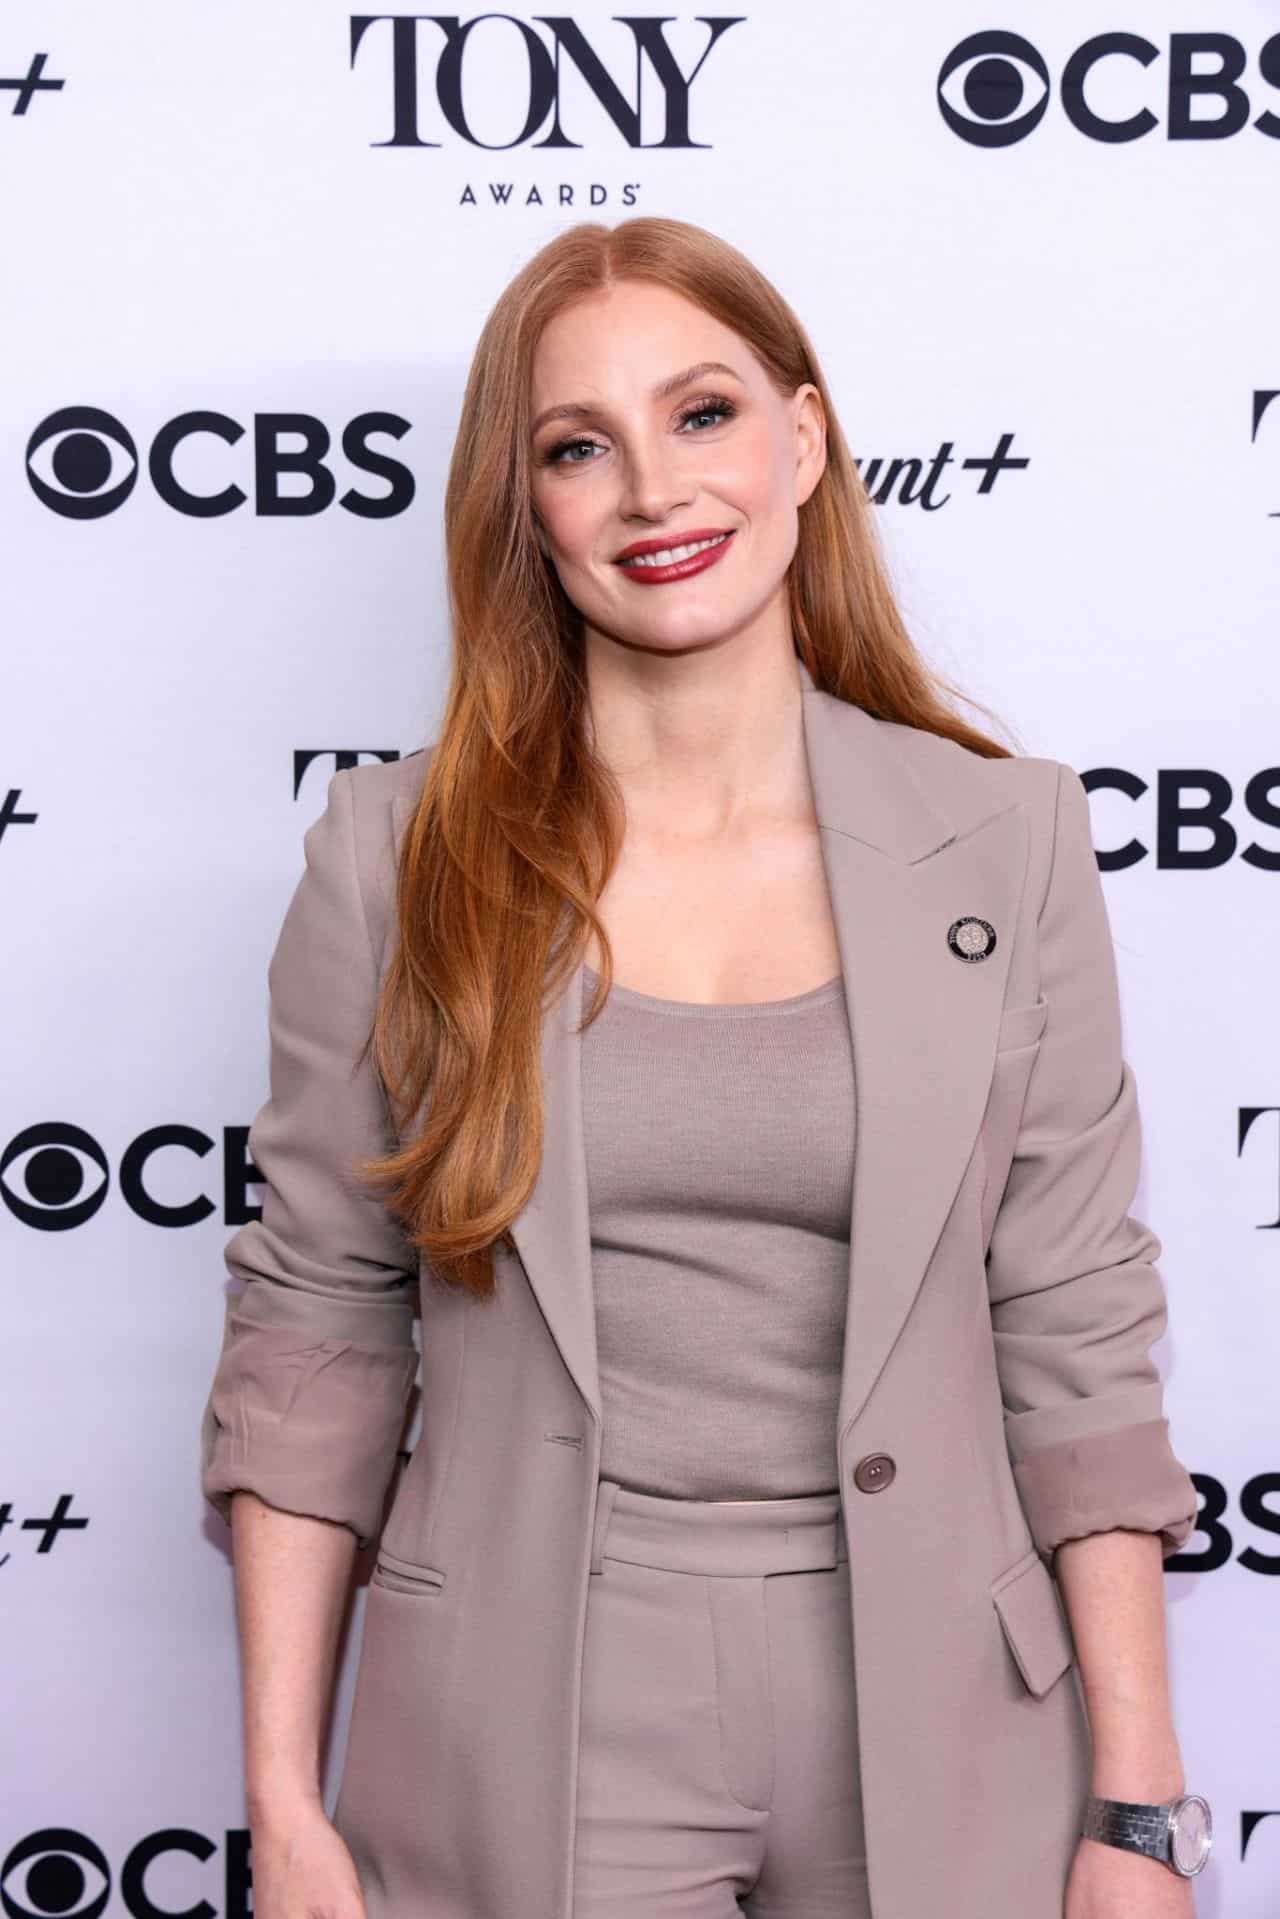 Jessica Chastain Shines at Tony Awards Meet The Nominees Press Event